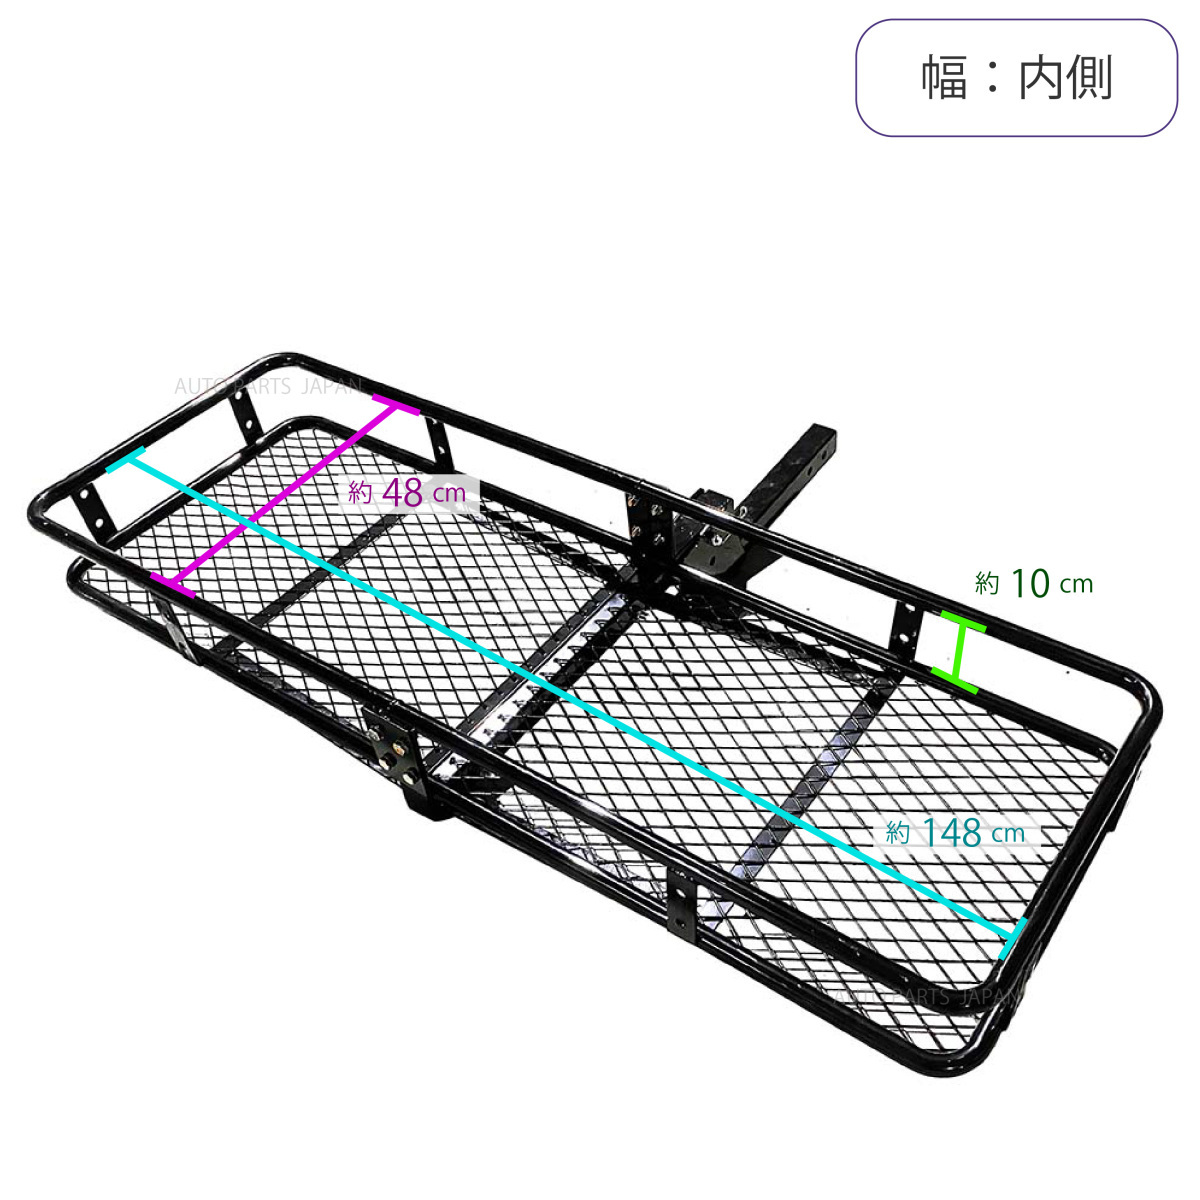  hitch carrier cargo folding type 150cm x 50cm 2 -inch car carrier basket outdoor rear all-purpose goods hitchmember 